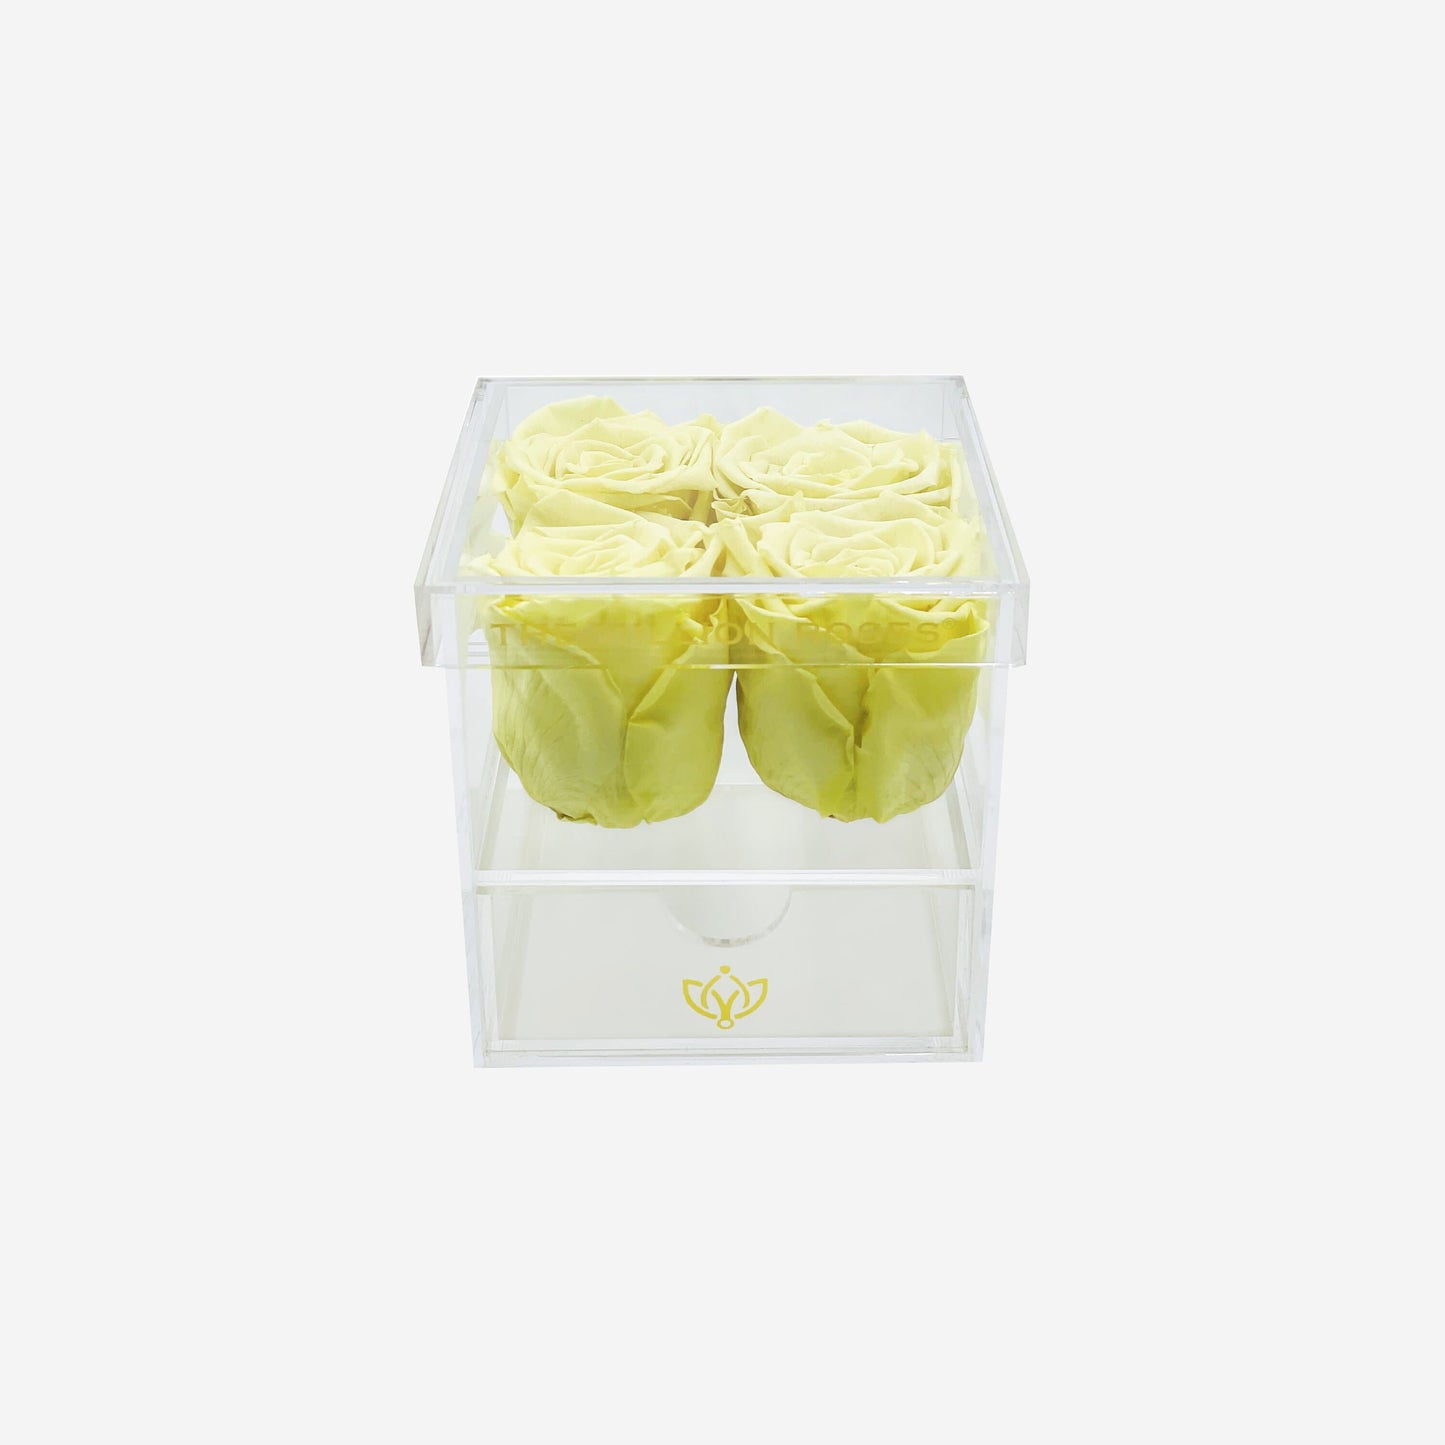 Acrylic 4 Drawer Box | Canary Yellow Roses - The Million Roses